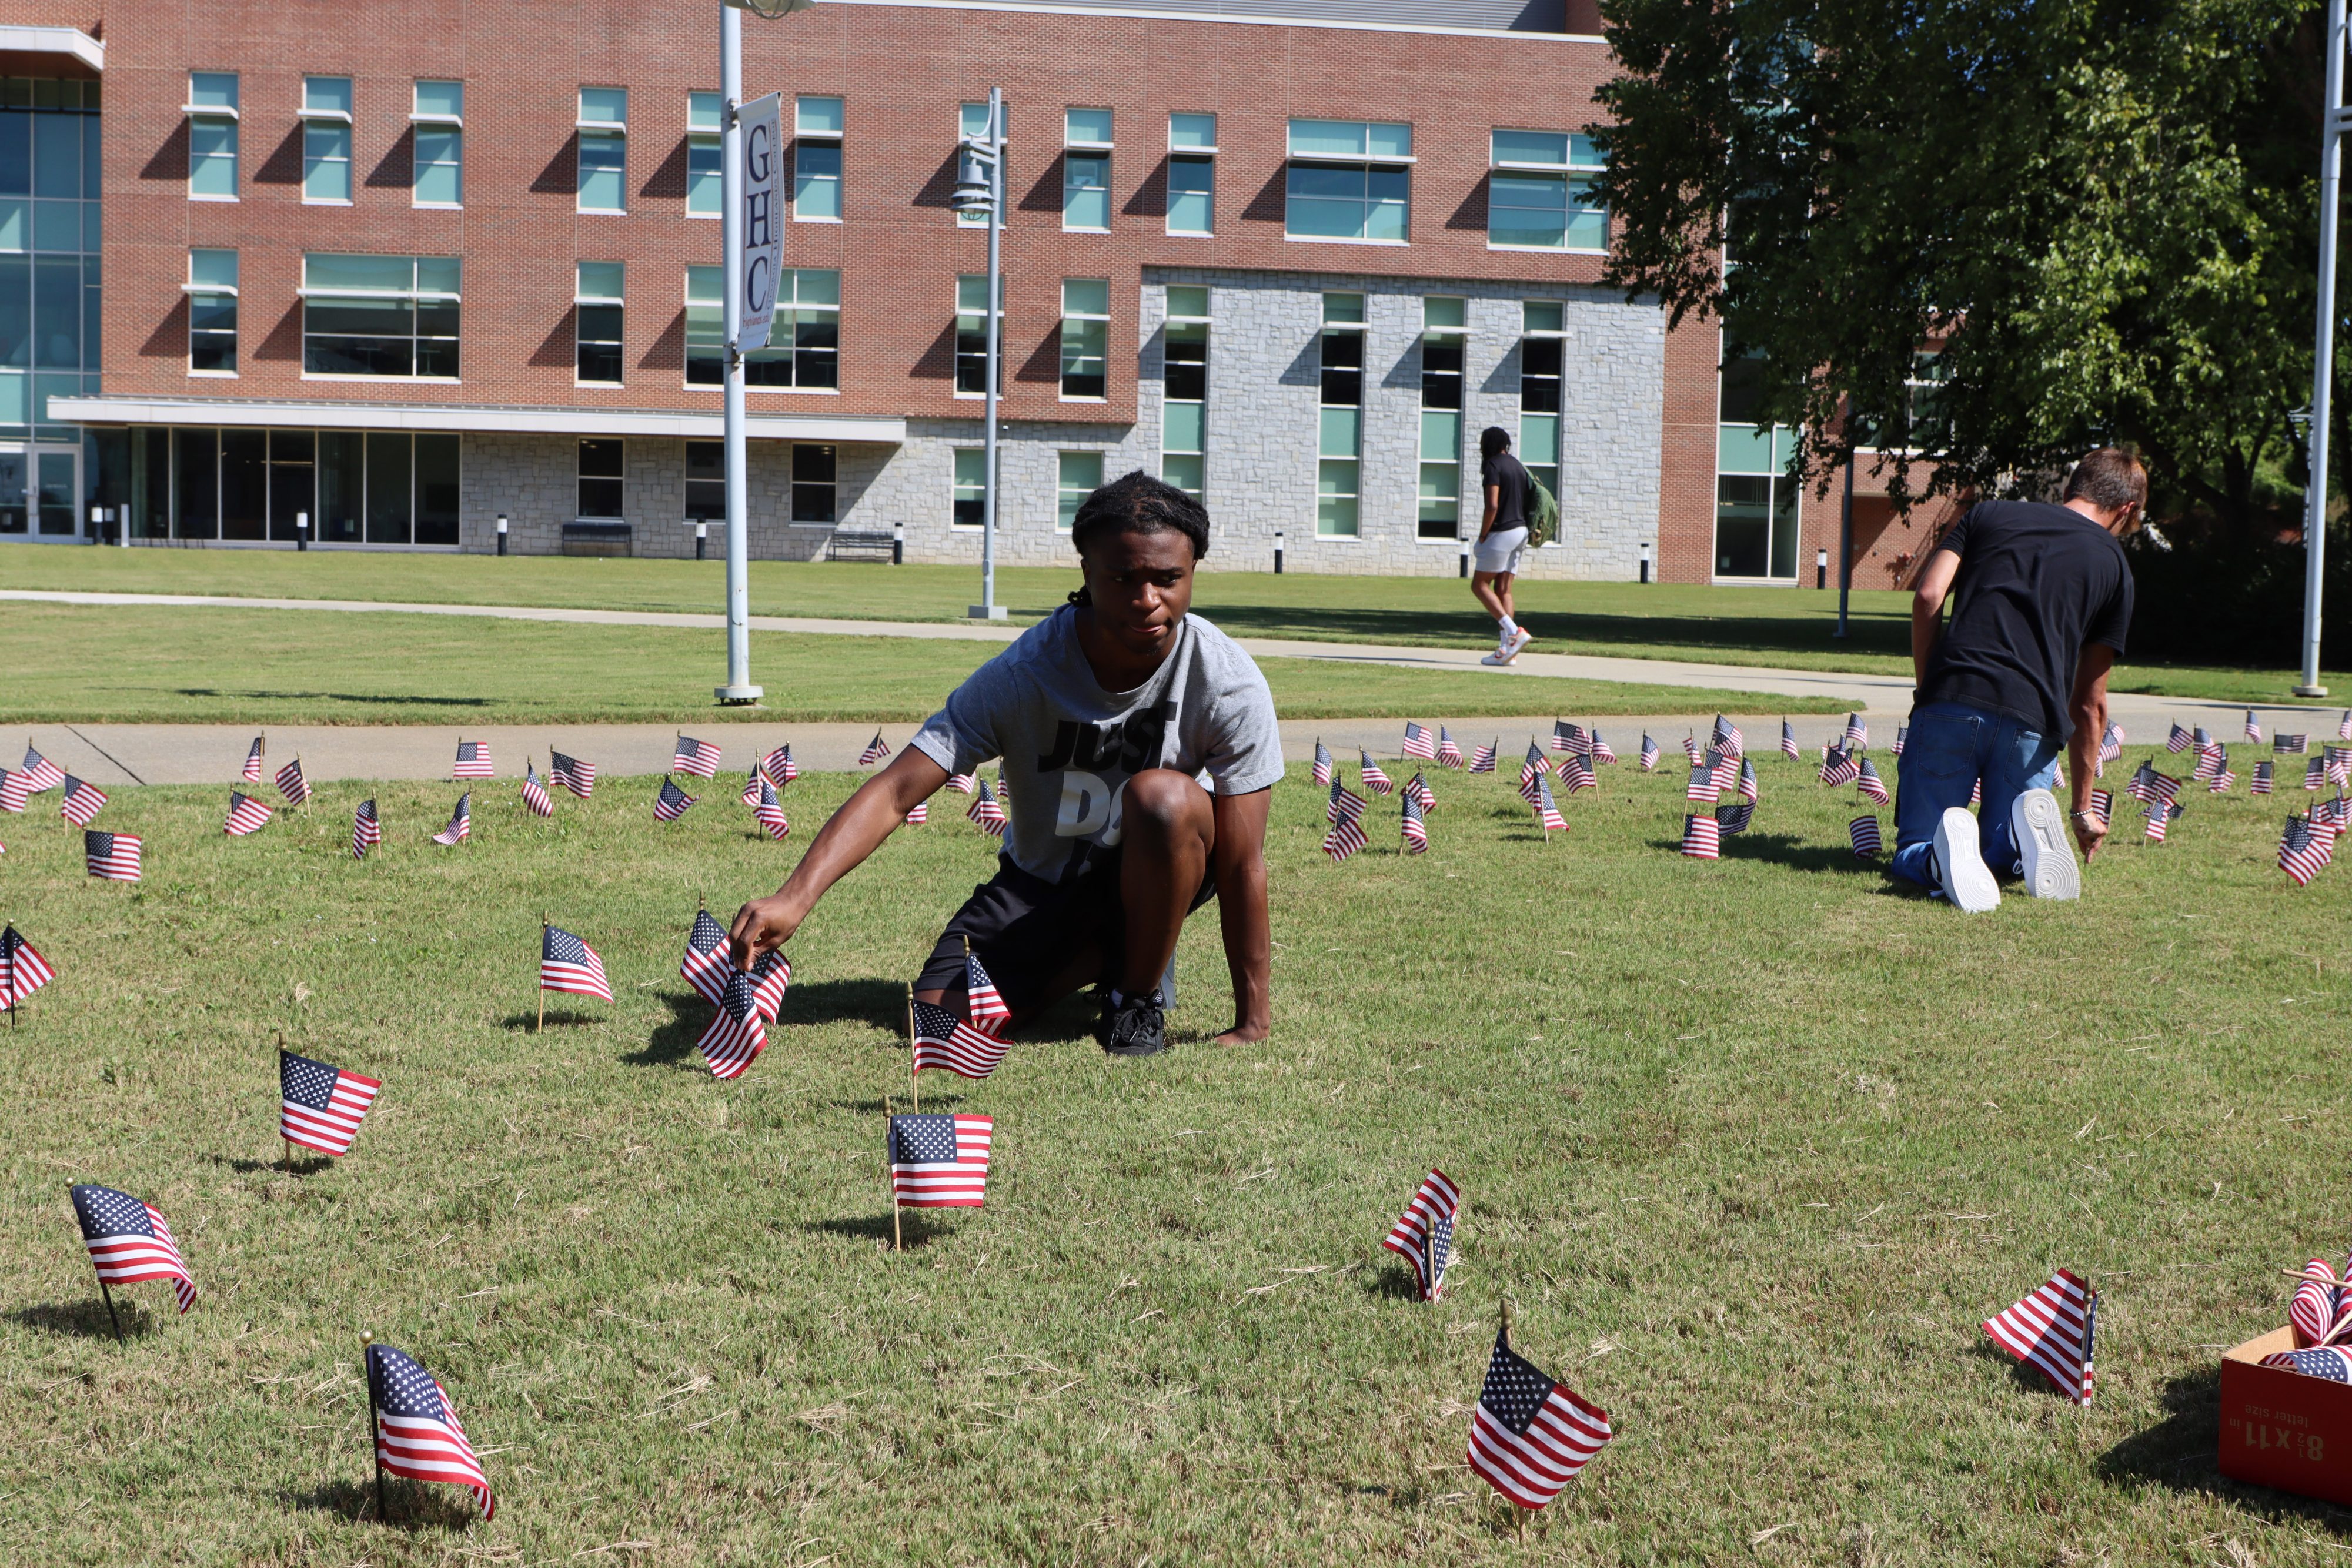 Student placing flags.